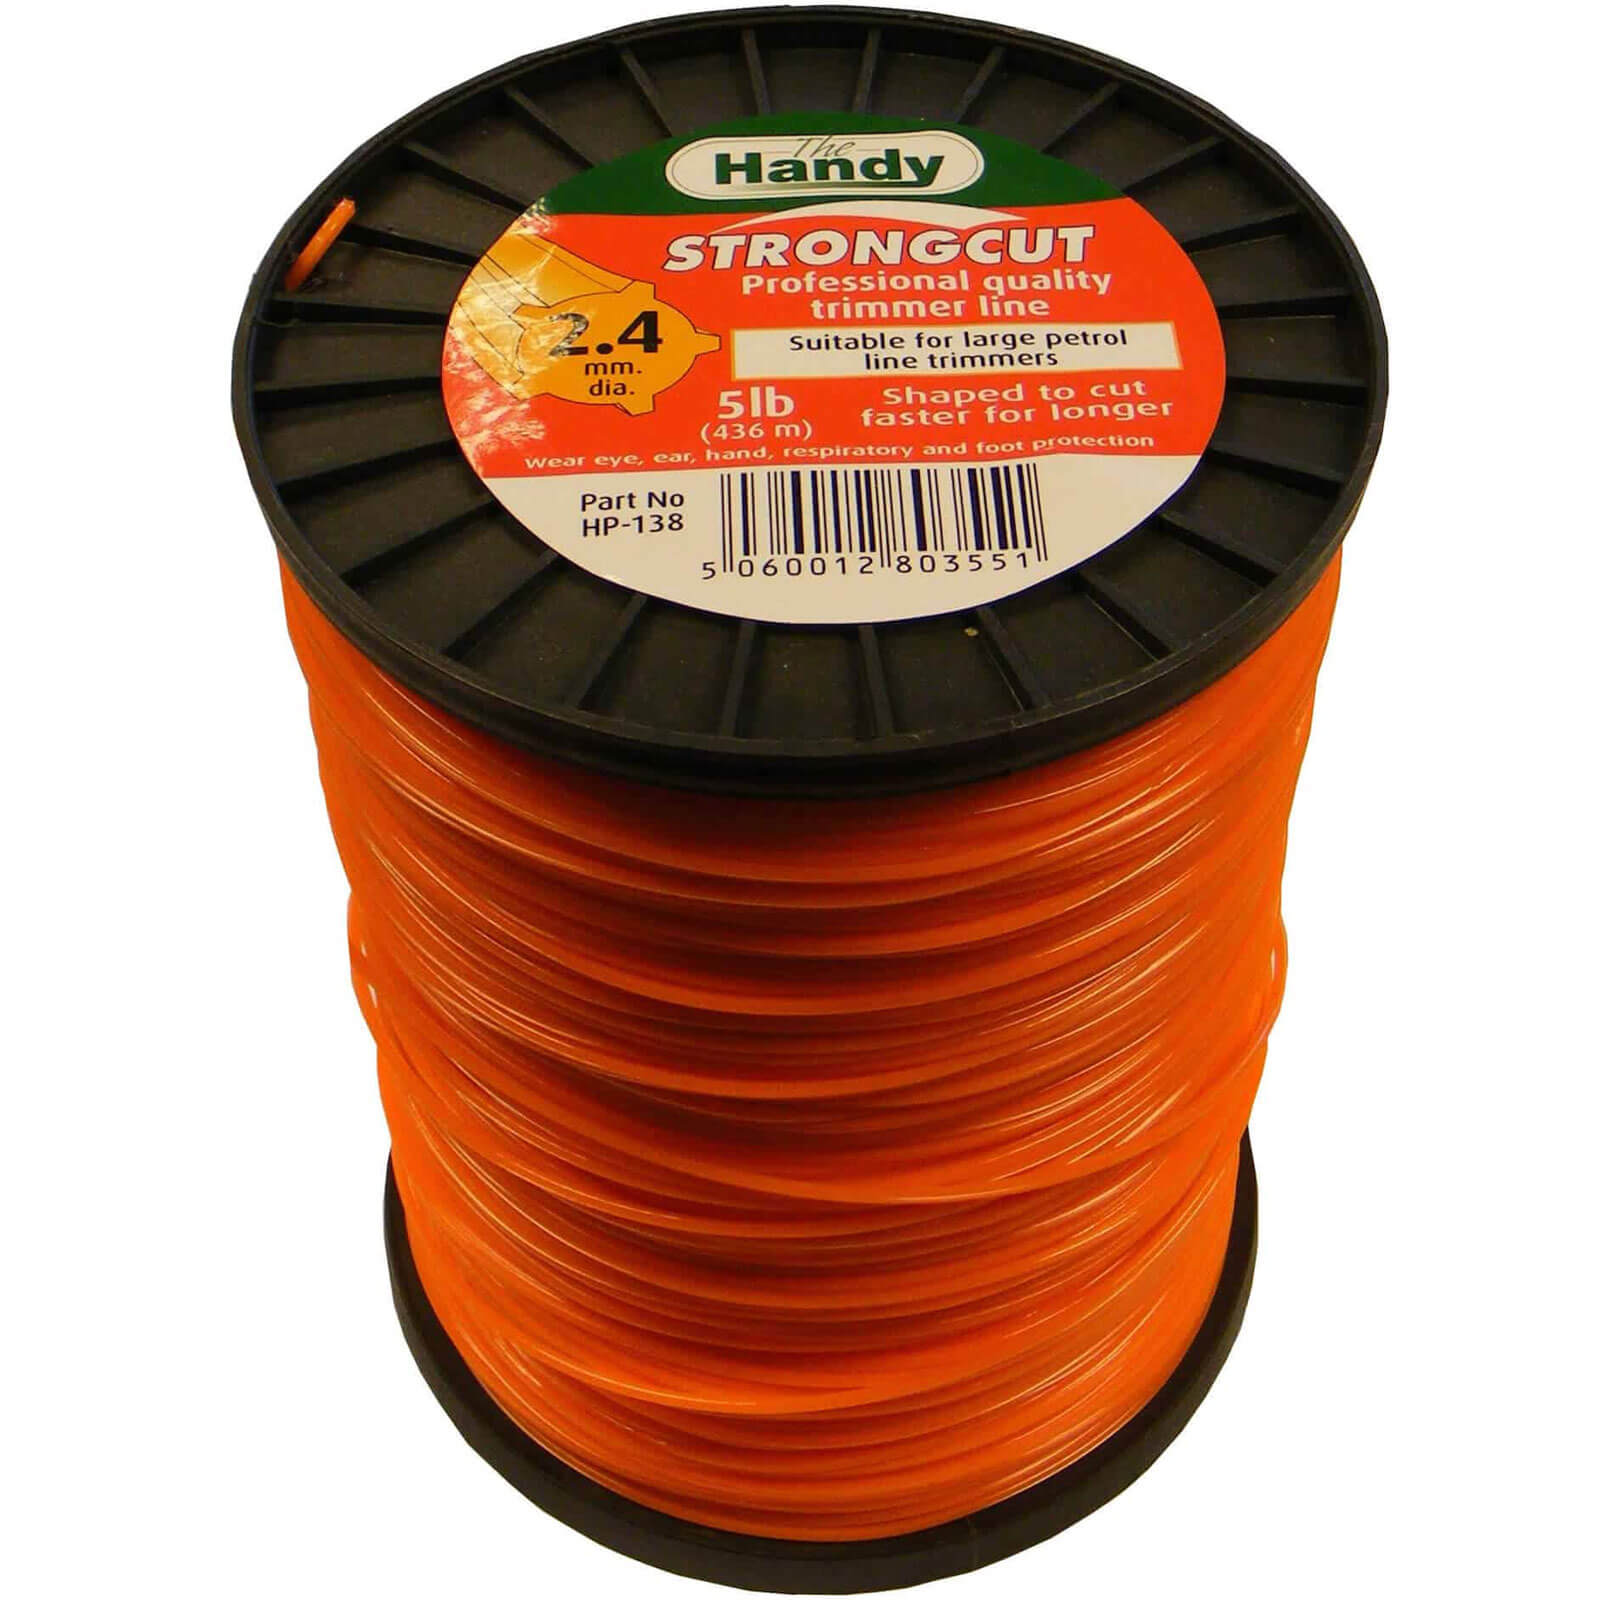 Image of Handy Professional Nylon Grass Trimmer Line 2.4mm 436m